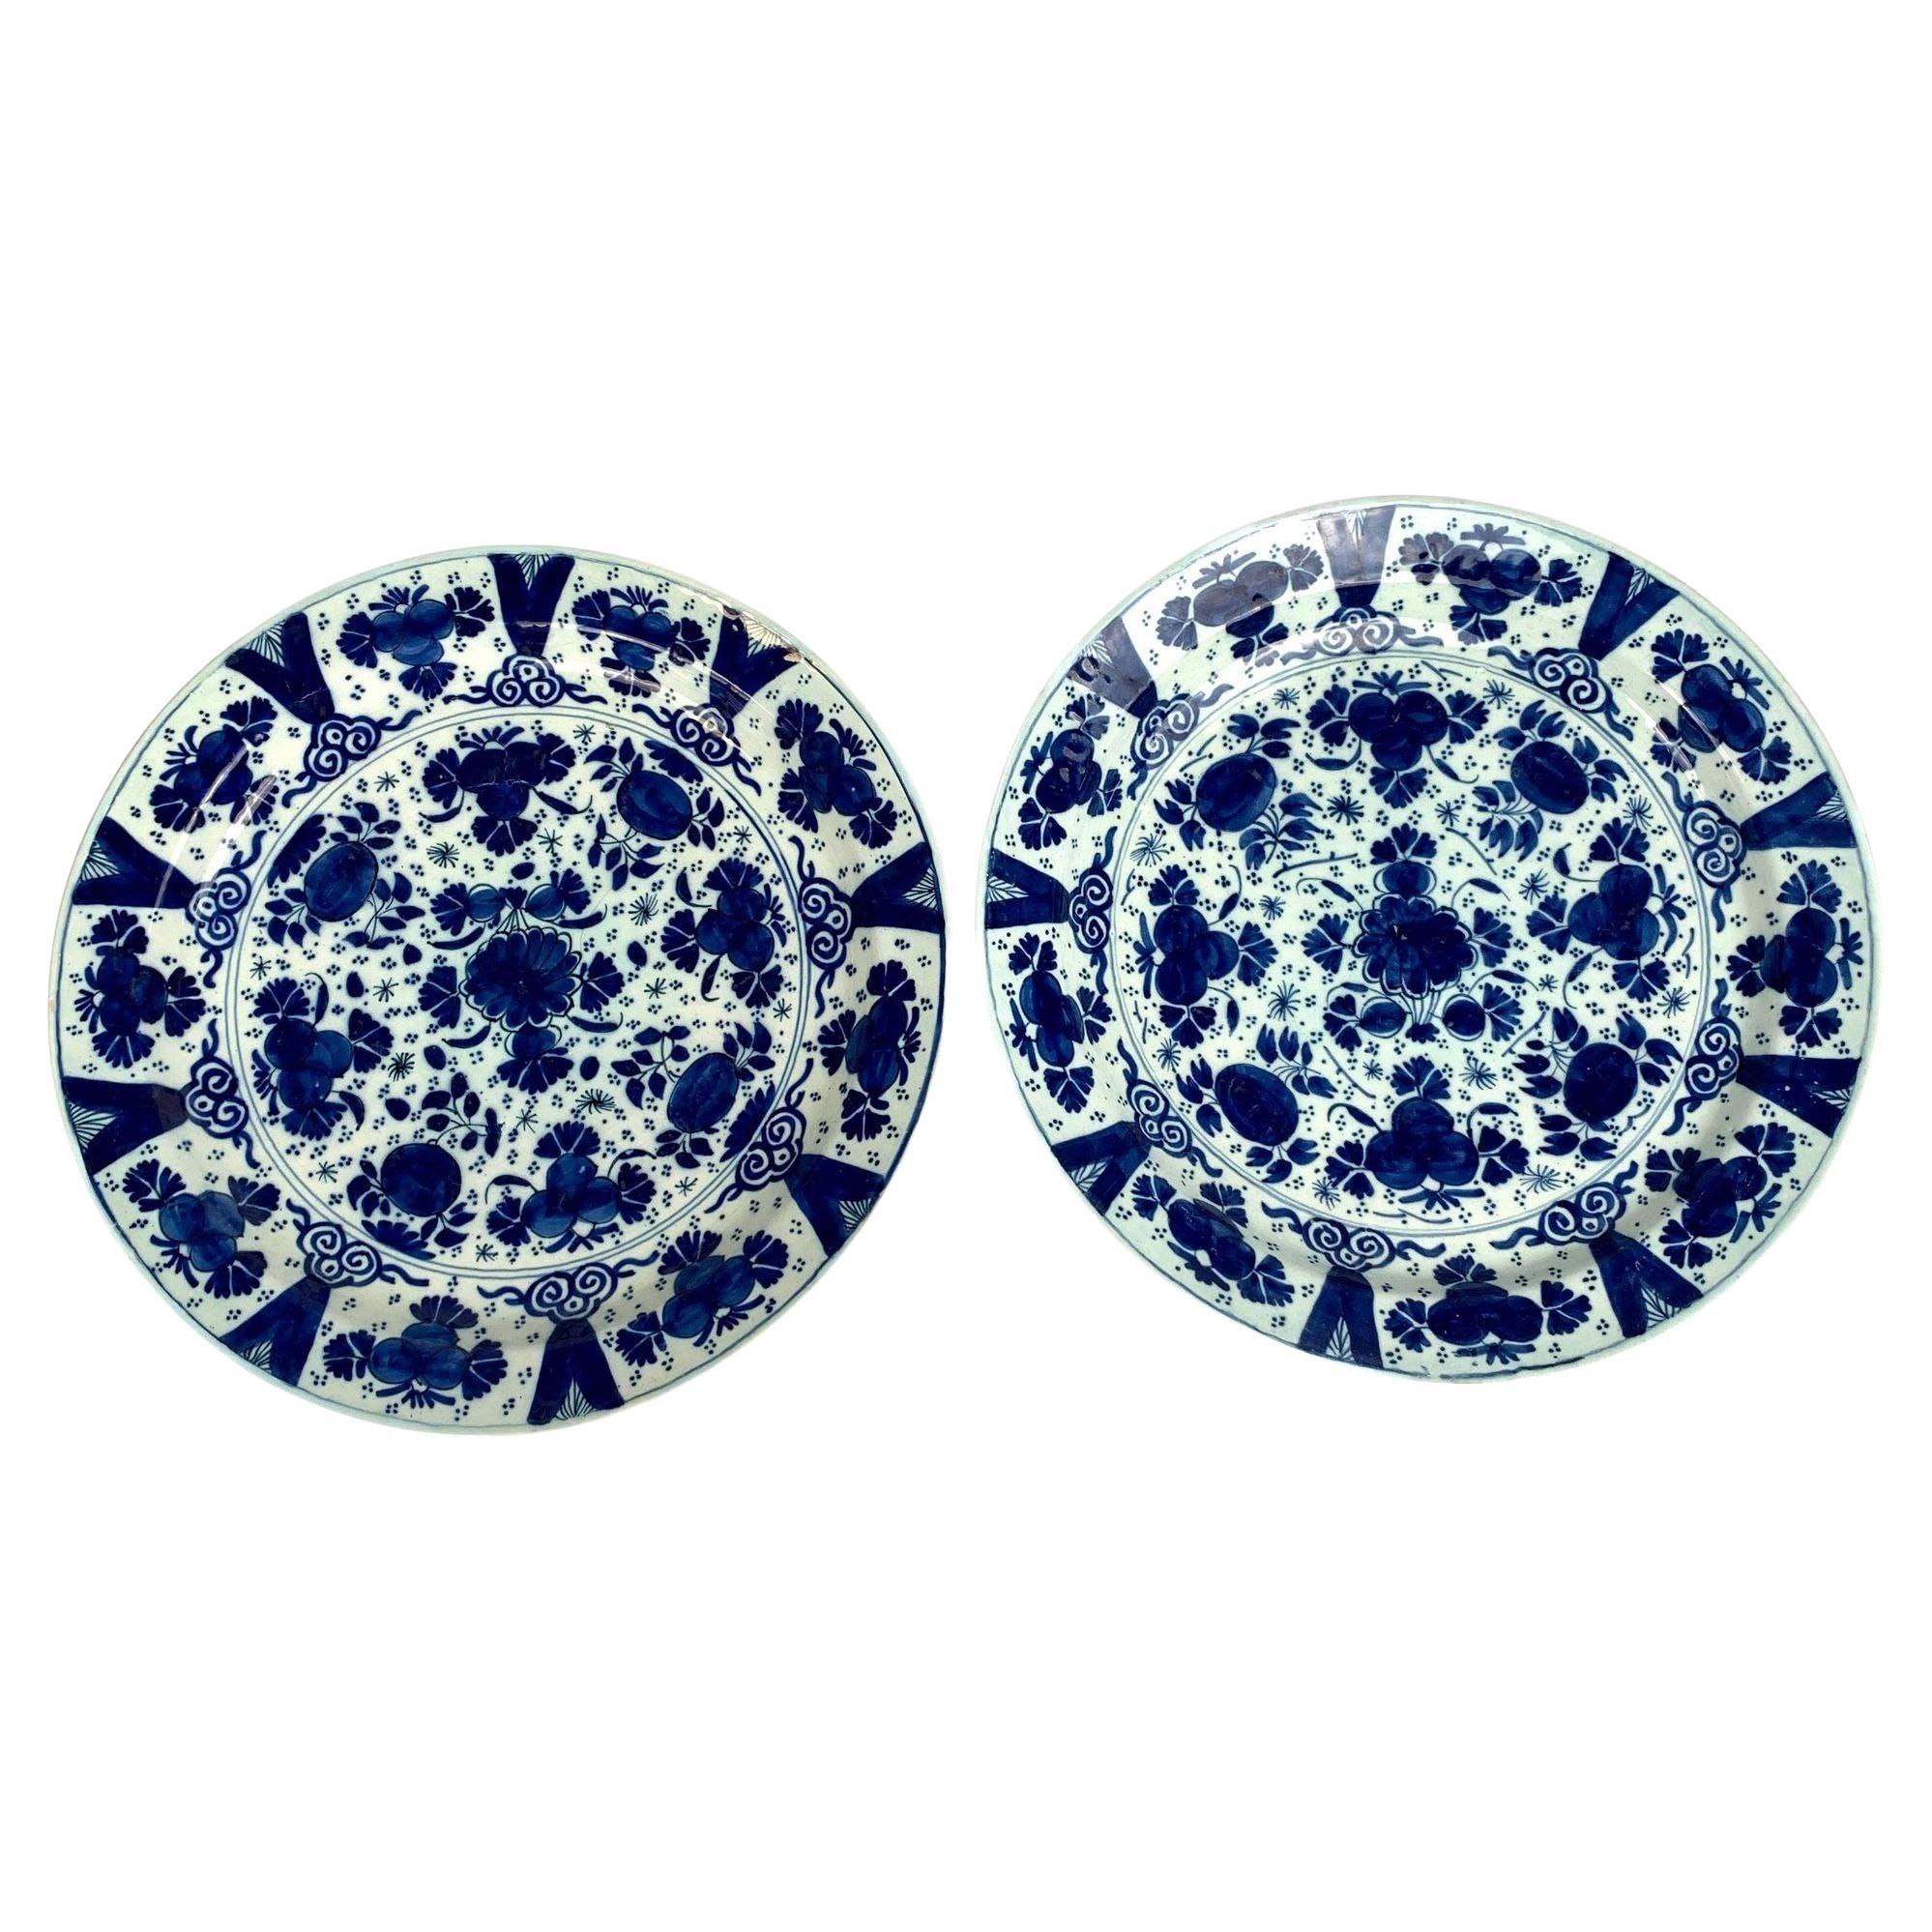 Pair Blue and White Delft Chargers, 18th Century, circa 1770